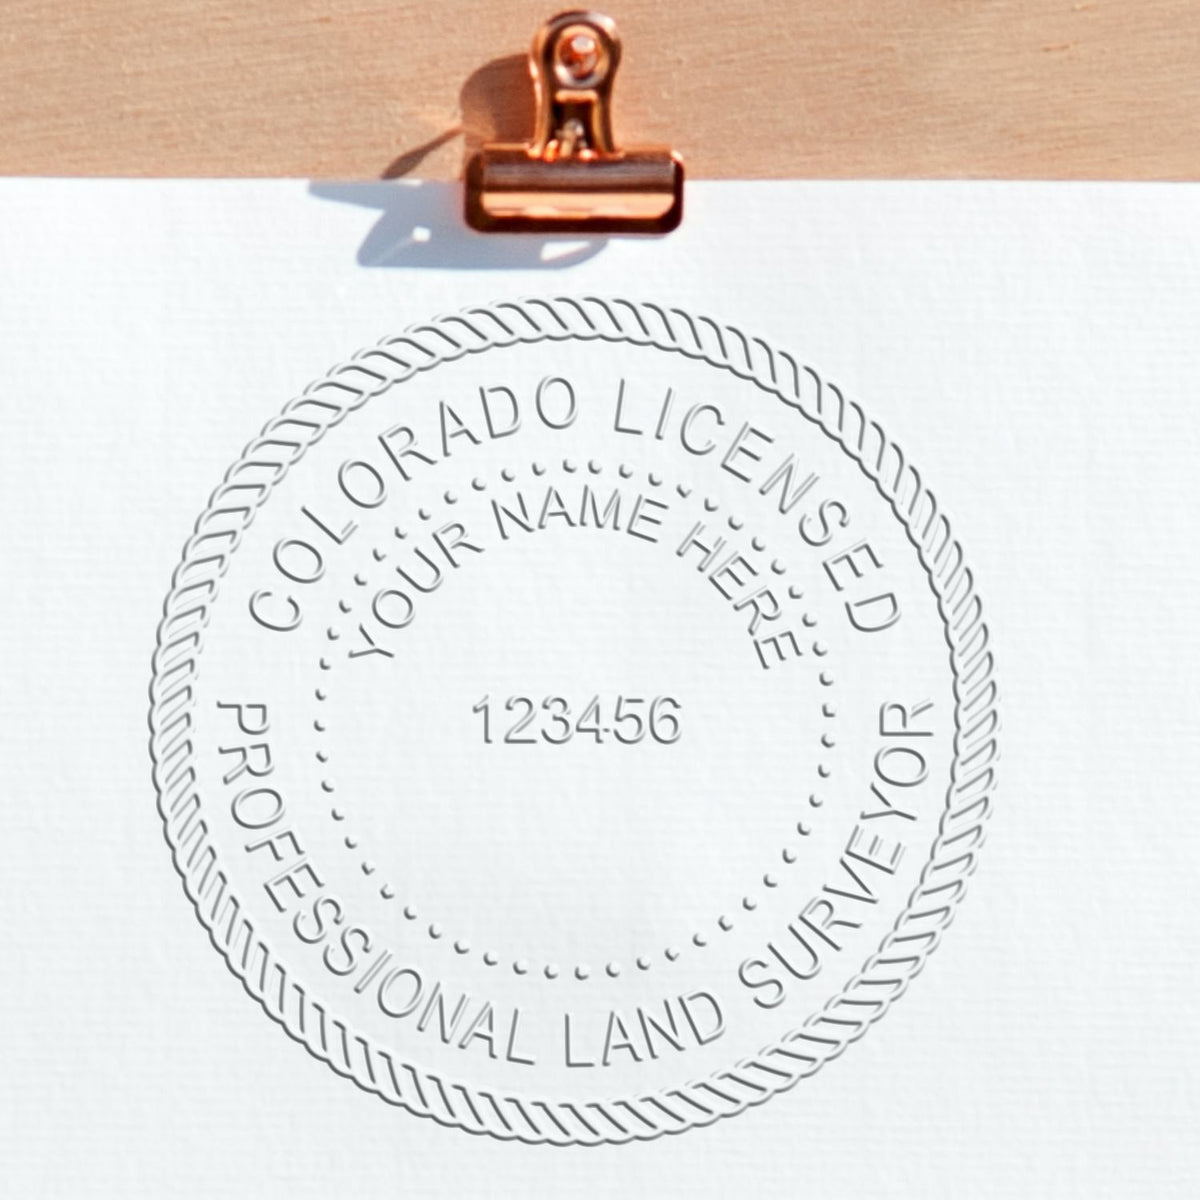 A photograph of the Hybrid Colorado Land Surveyor Seal stamp impression reveals a vivid, professional image of the on paper.